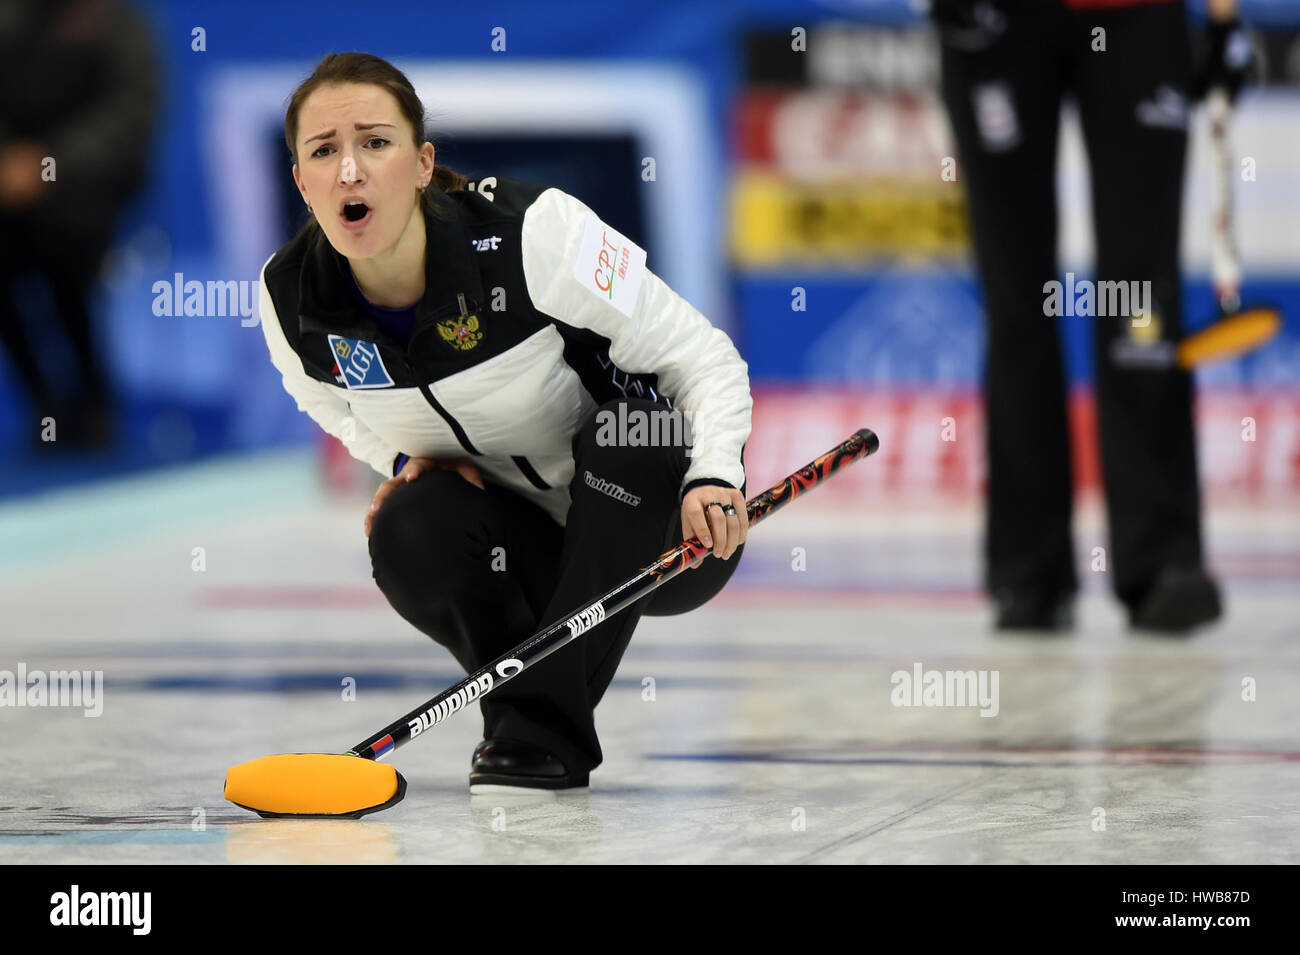 Beijing, China. 19th Mar, 2017. Anna Sidorova of Russia competes during the World Women's Curling Championship match against Canada, in Beijing, capital of China, March 19, 2017. Canada won 10-9. Credit: Ju Huanzong/Xinhua/Alamy Live News Stock Photo